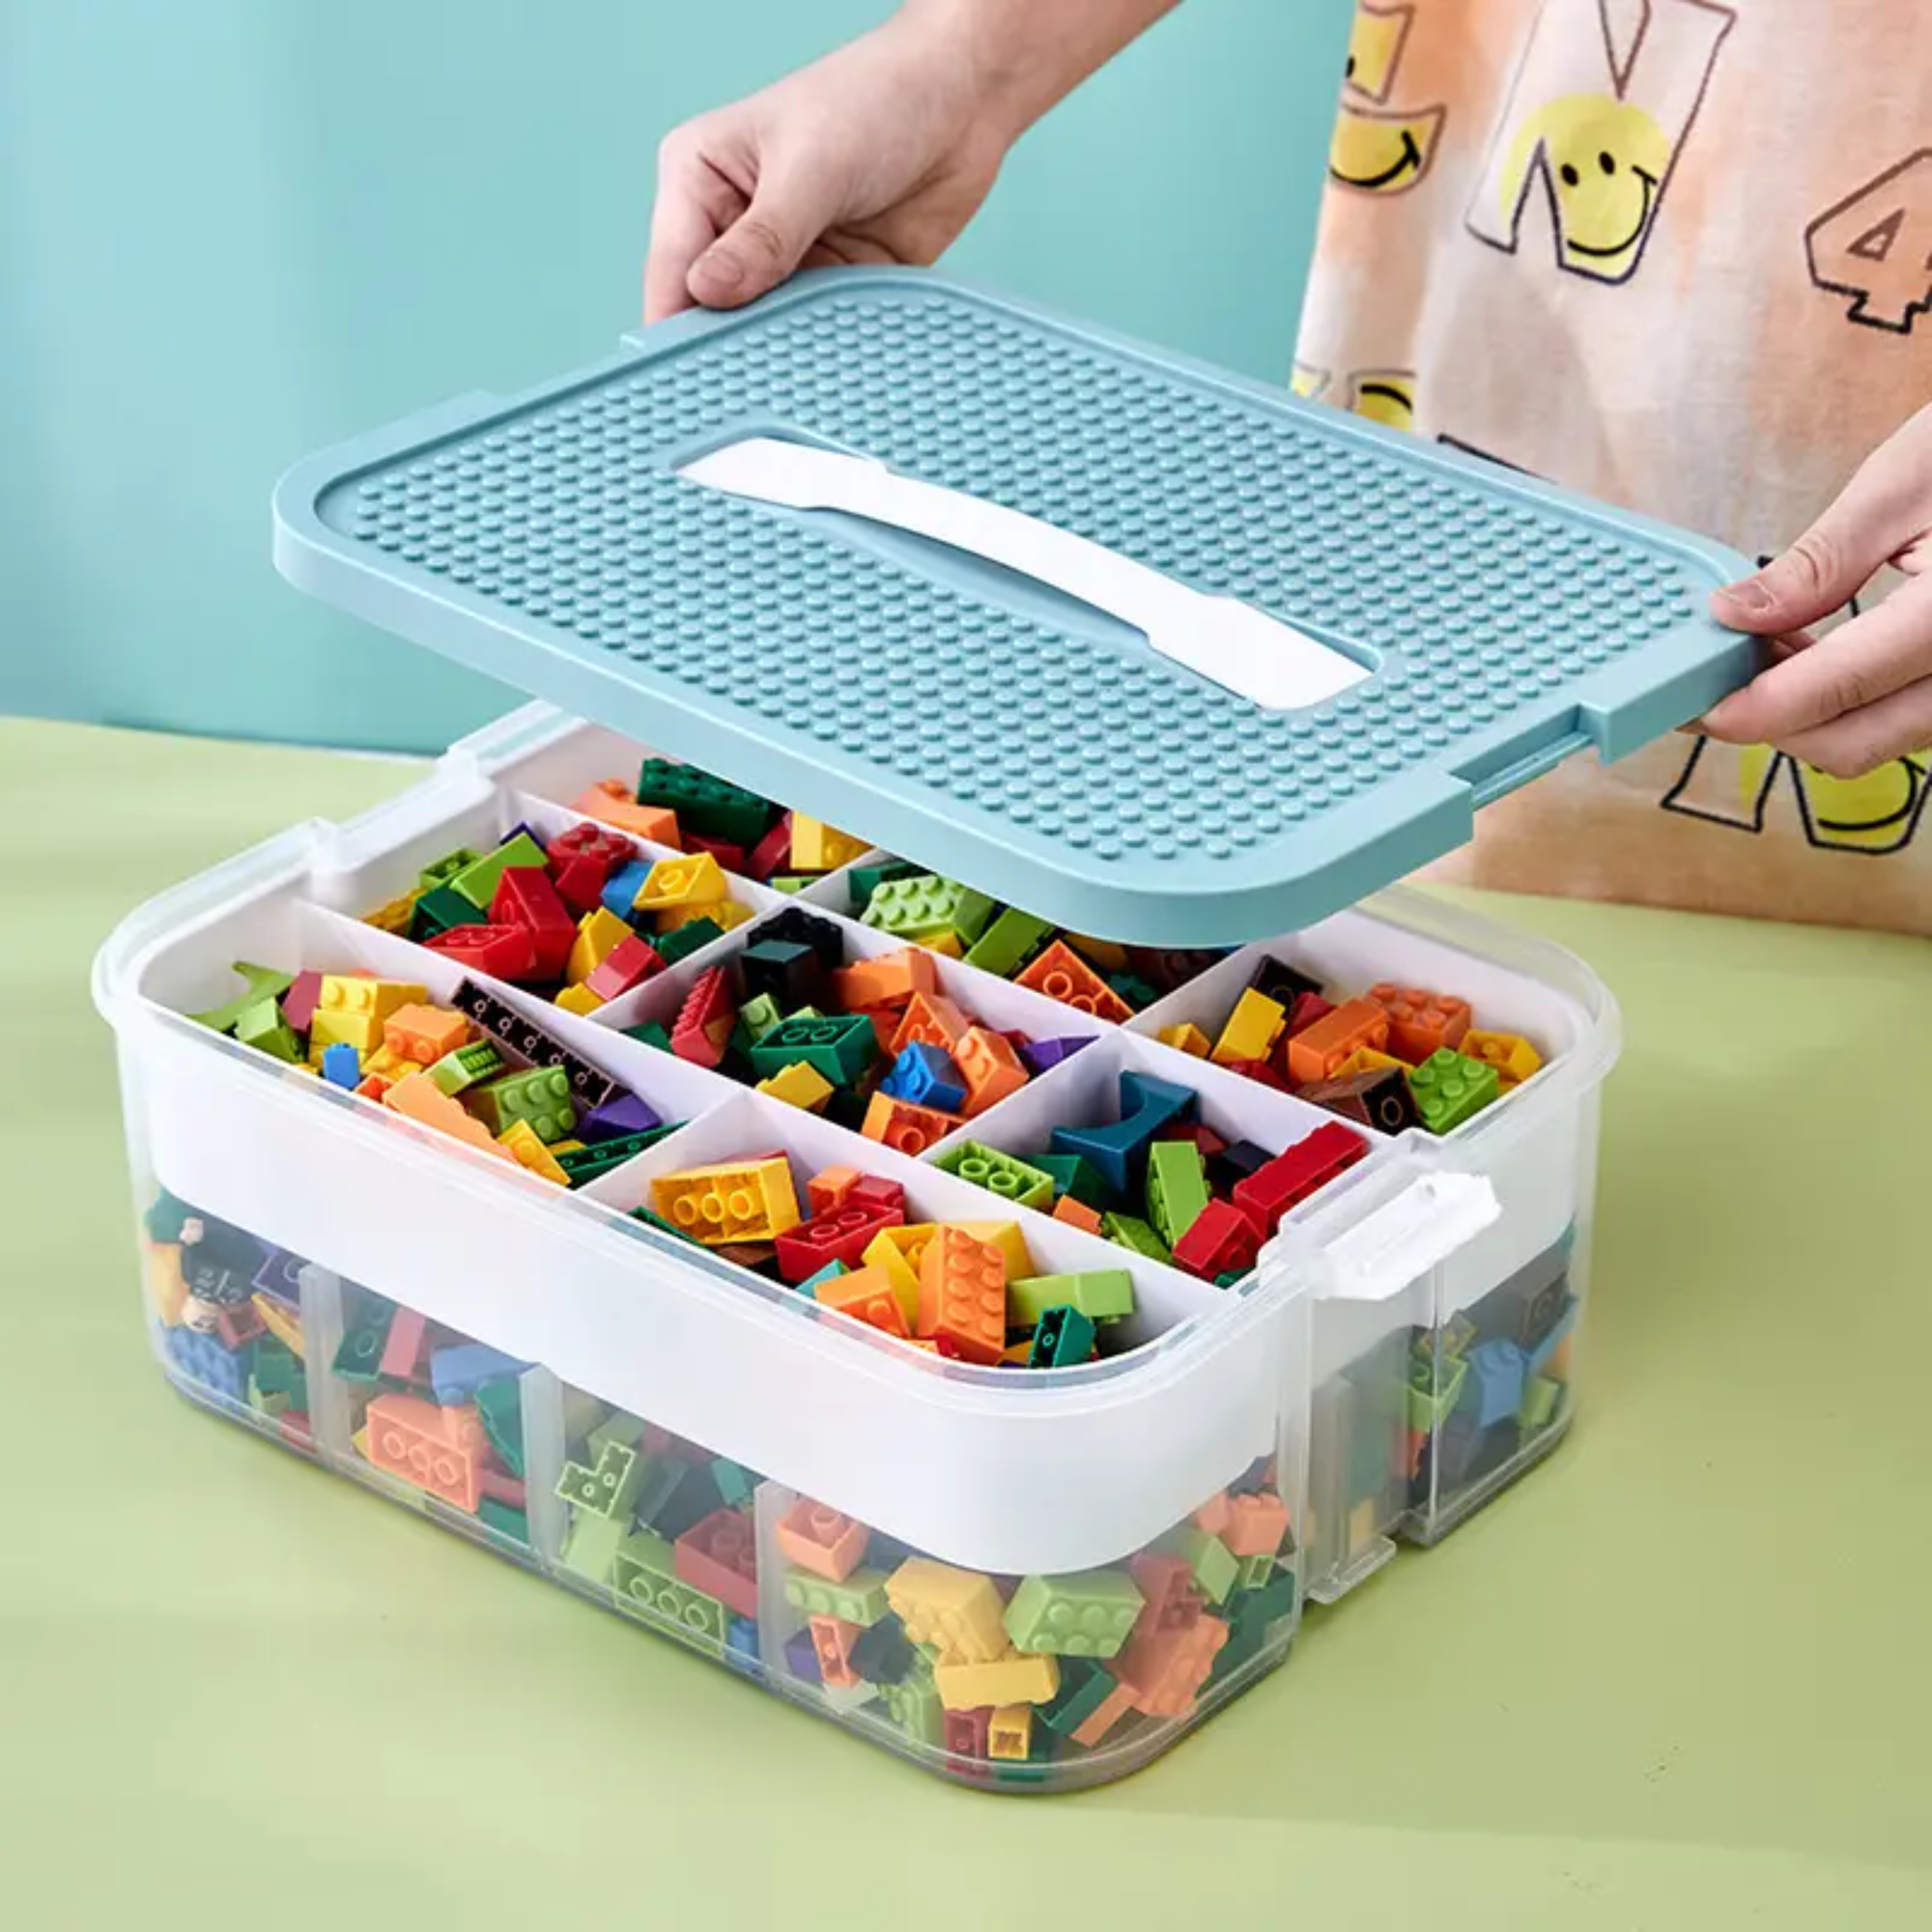 Stackable Building Blocks Storage Box with Removable Compartments, Sorting  and Storing Box Organizer for Toy Building Blocks and Other Small Items